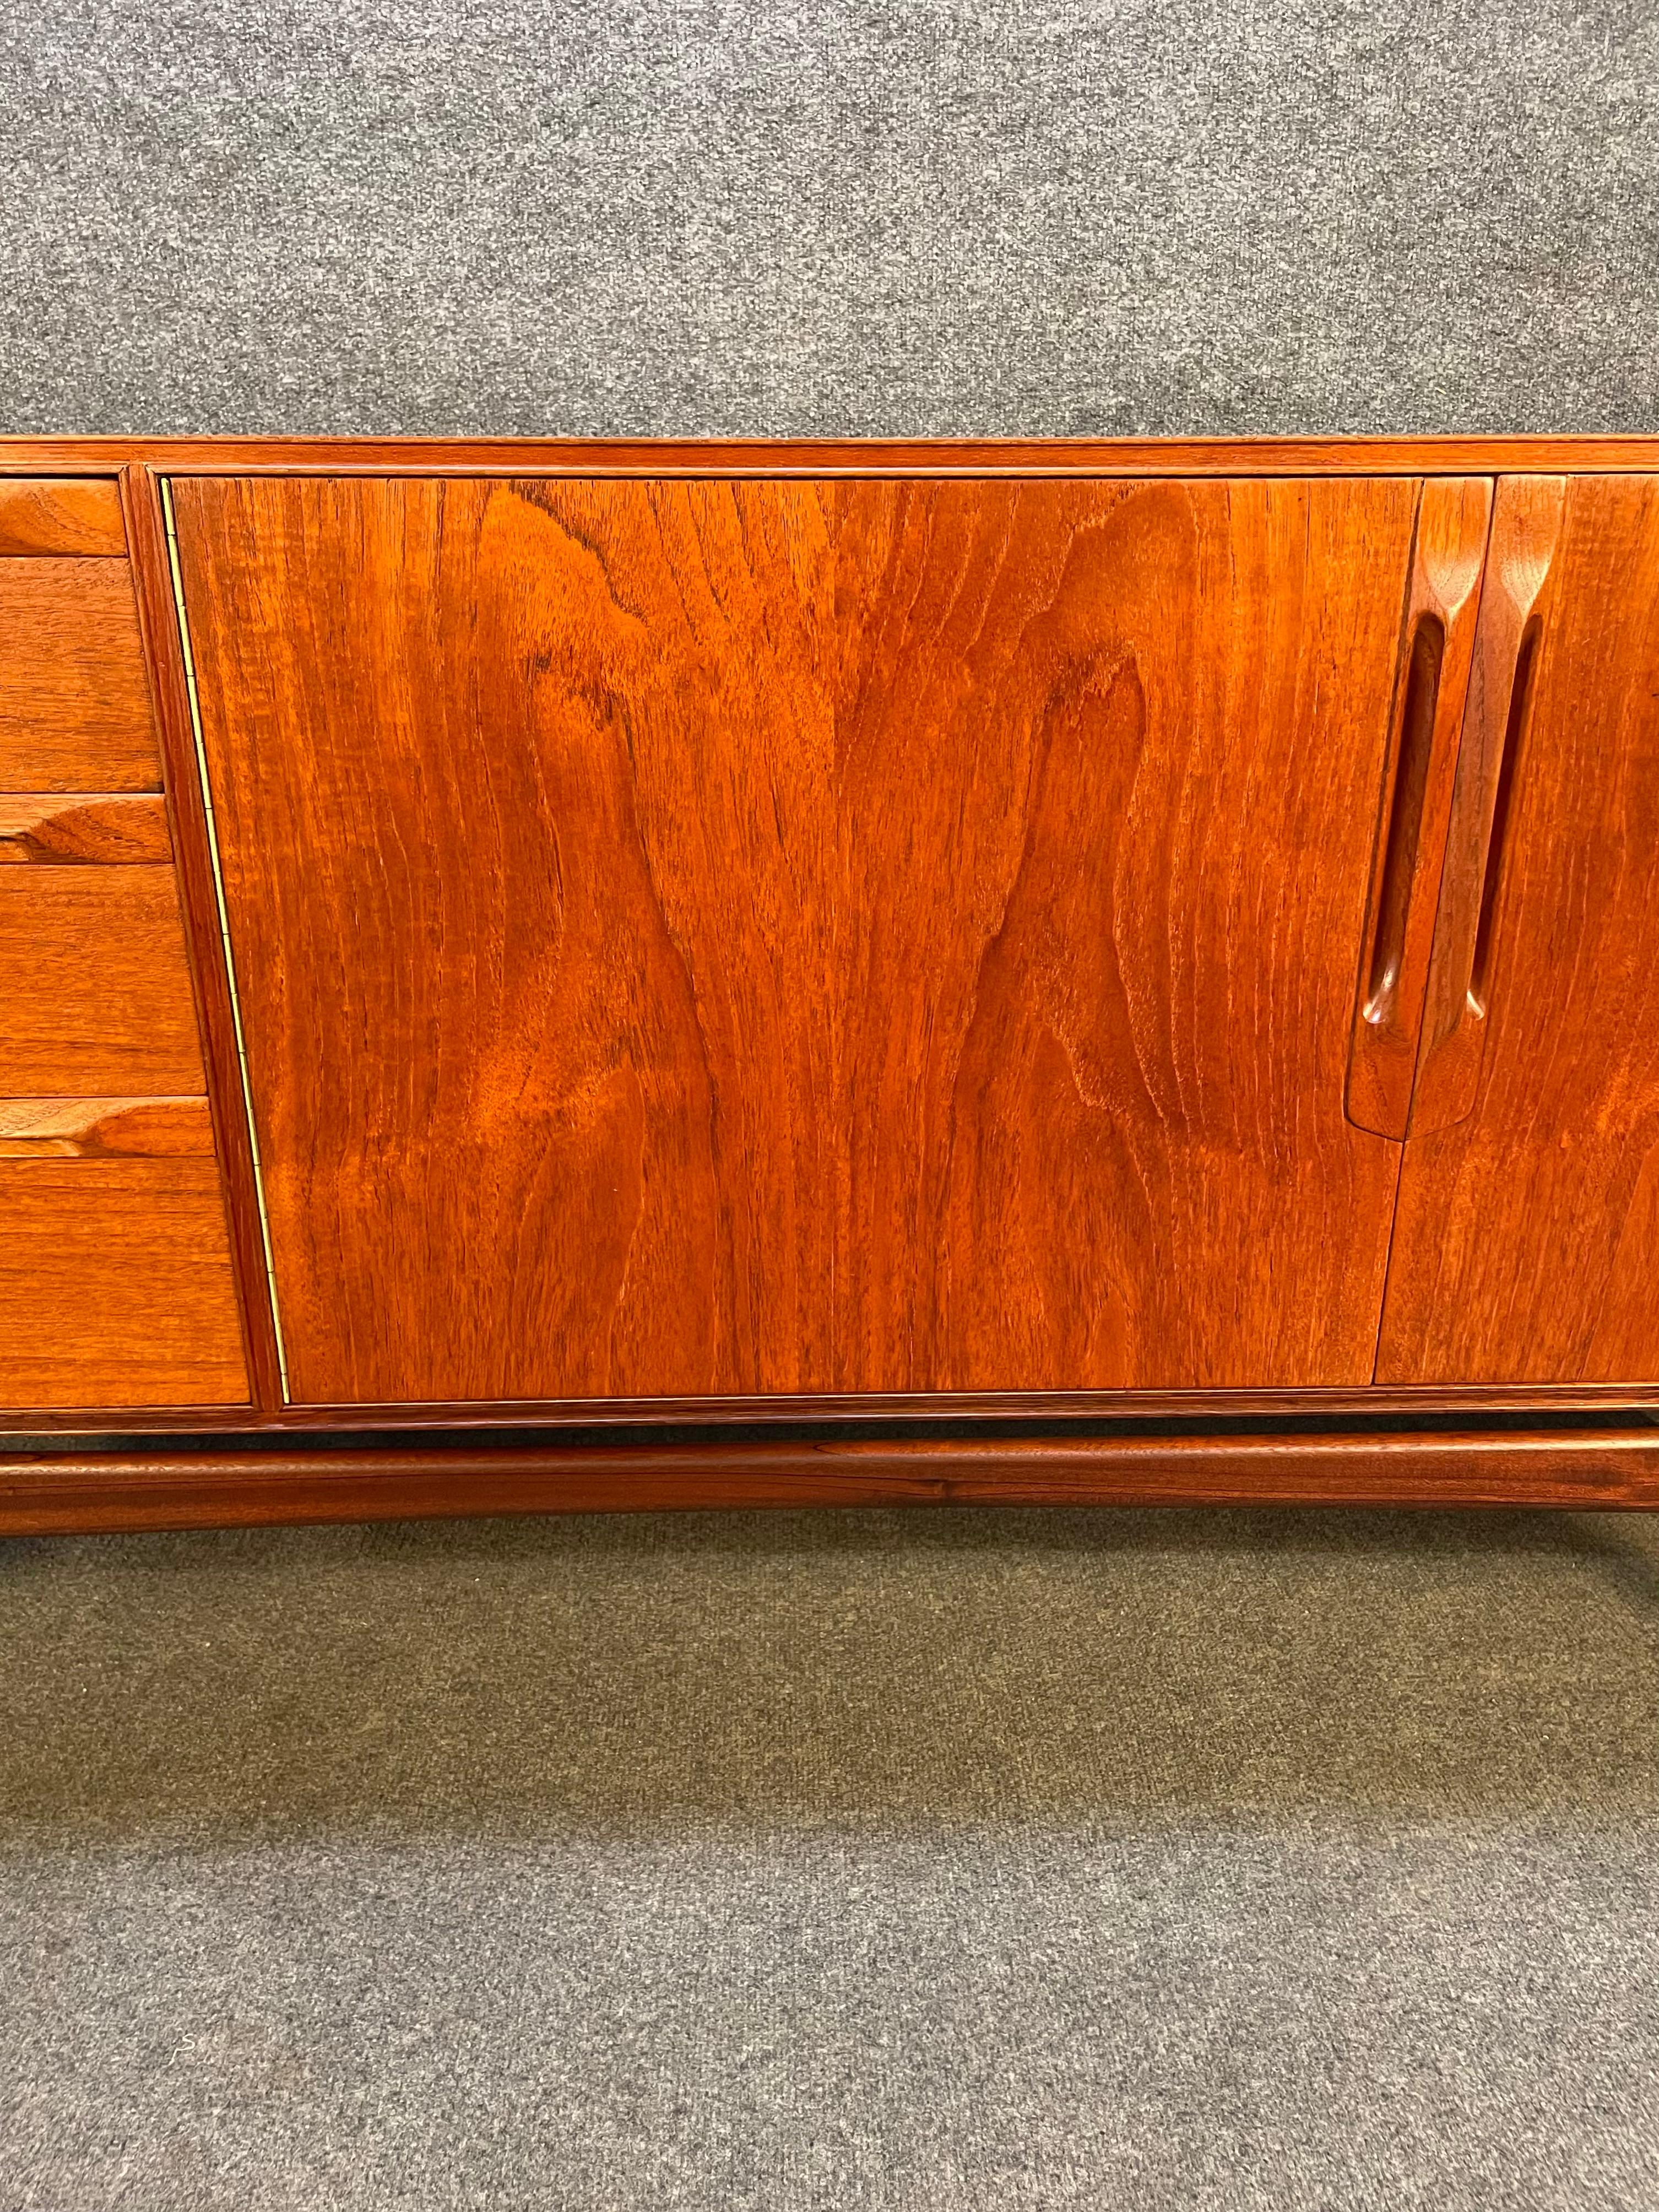 Here is a superb and rare British Mid-Century Modern teak sideboard model 